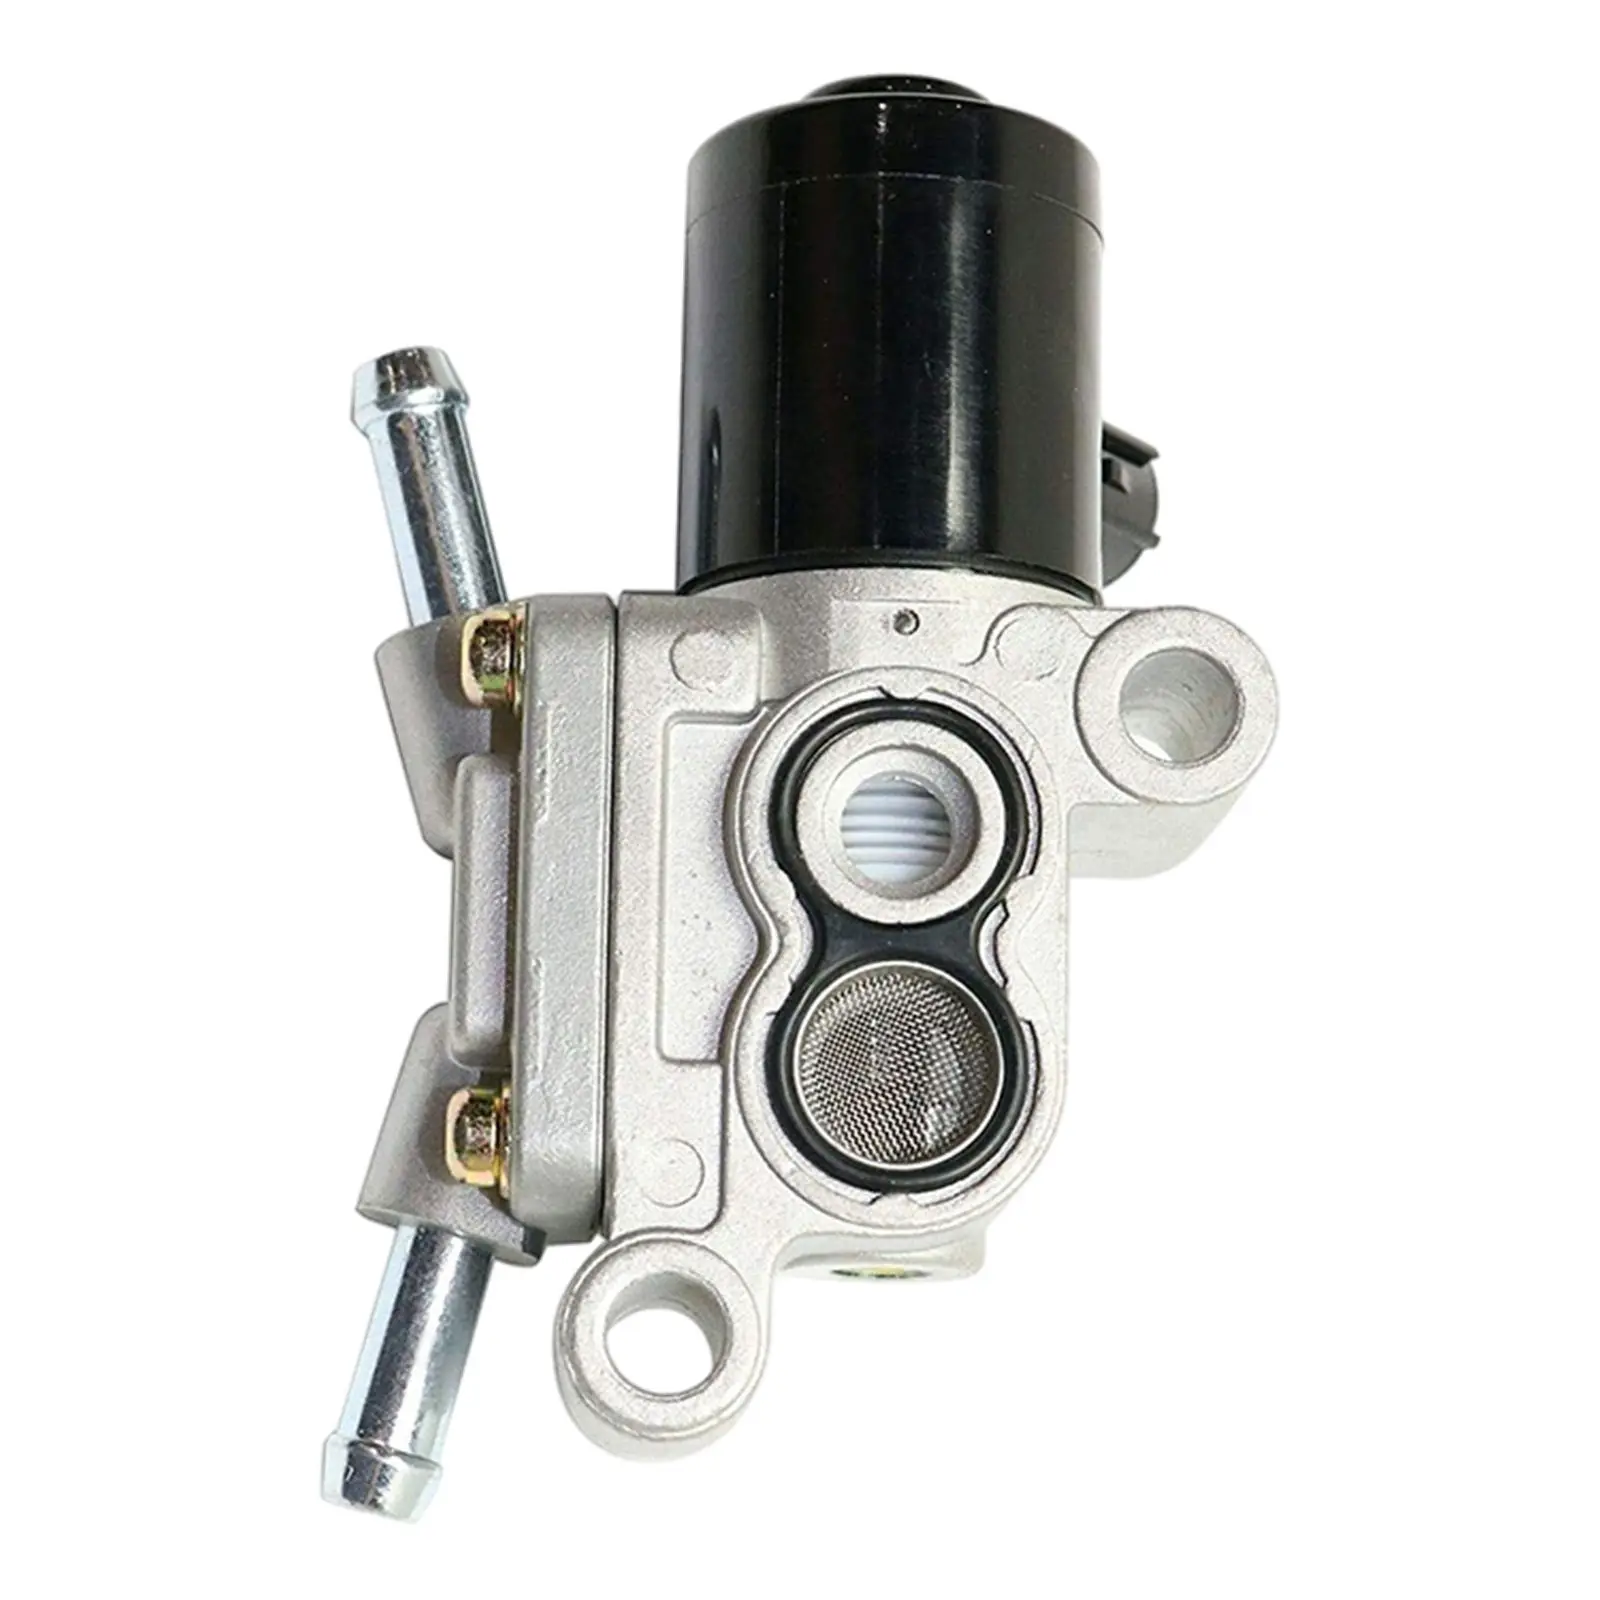 36450PT3A01 Idle Air Control Valve Metal Engine Parts Fit for Honda Car Parts High Performance for Honda Accord 1990-1993